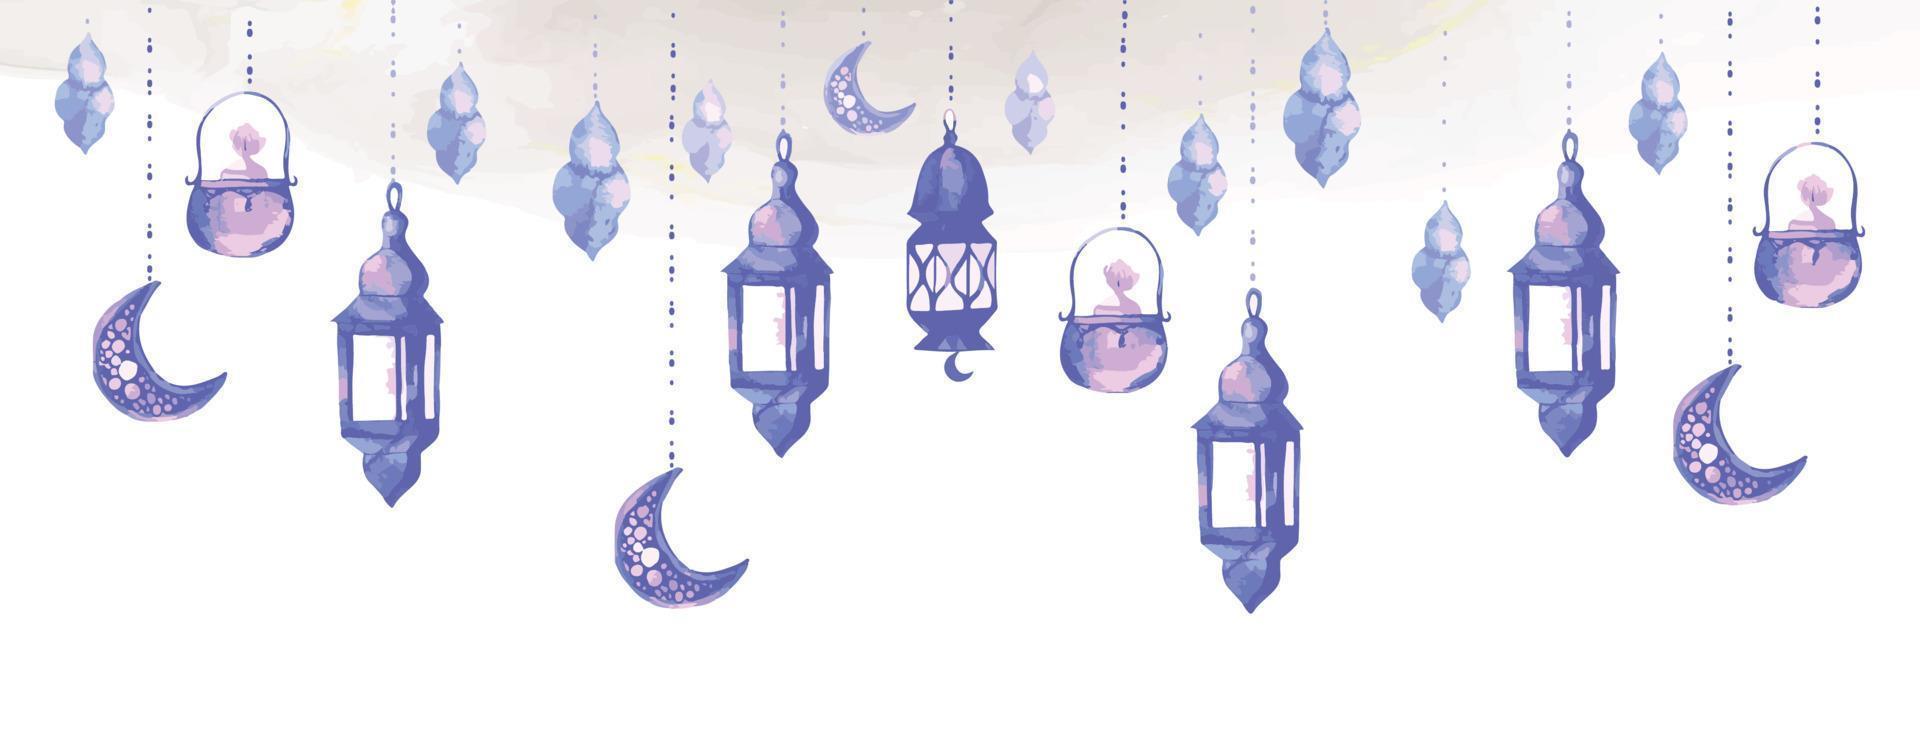 Vector illustration of ramadan and eid mubarak icons. Suitable for background, sticker, card, etc